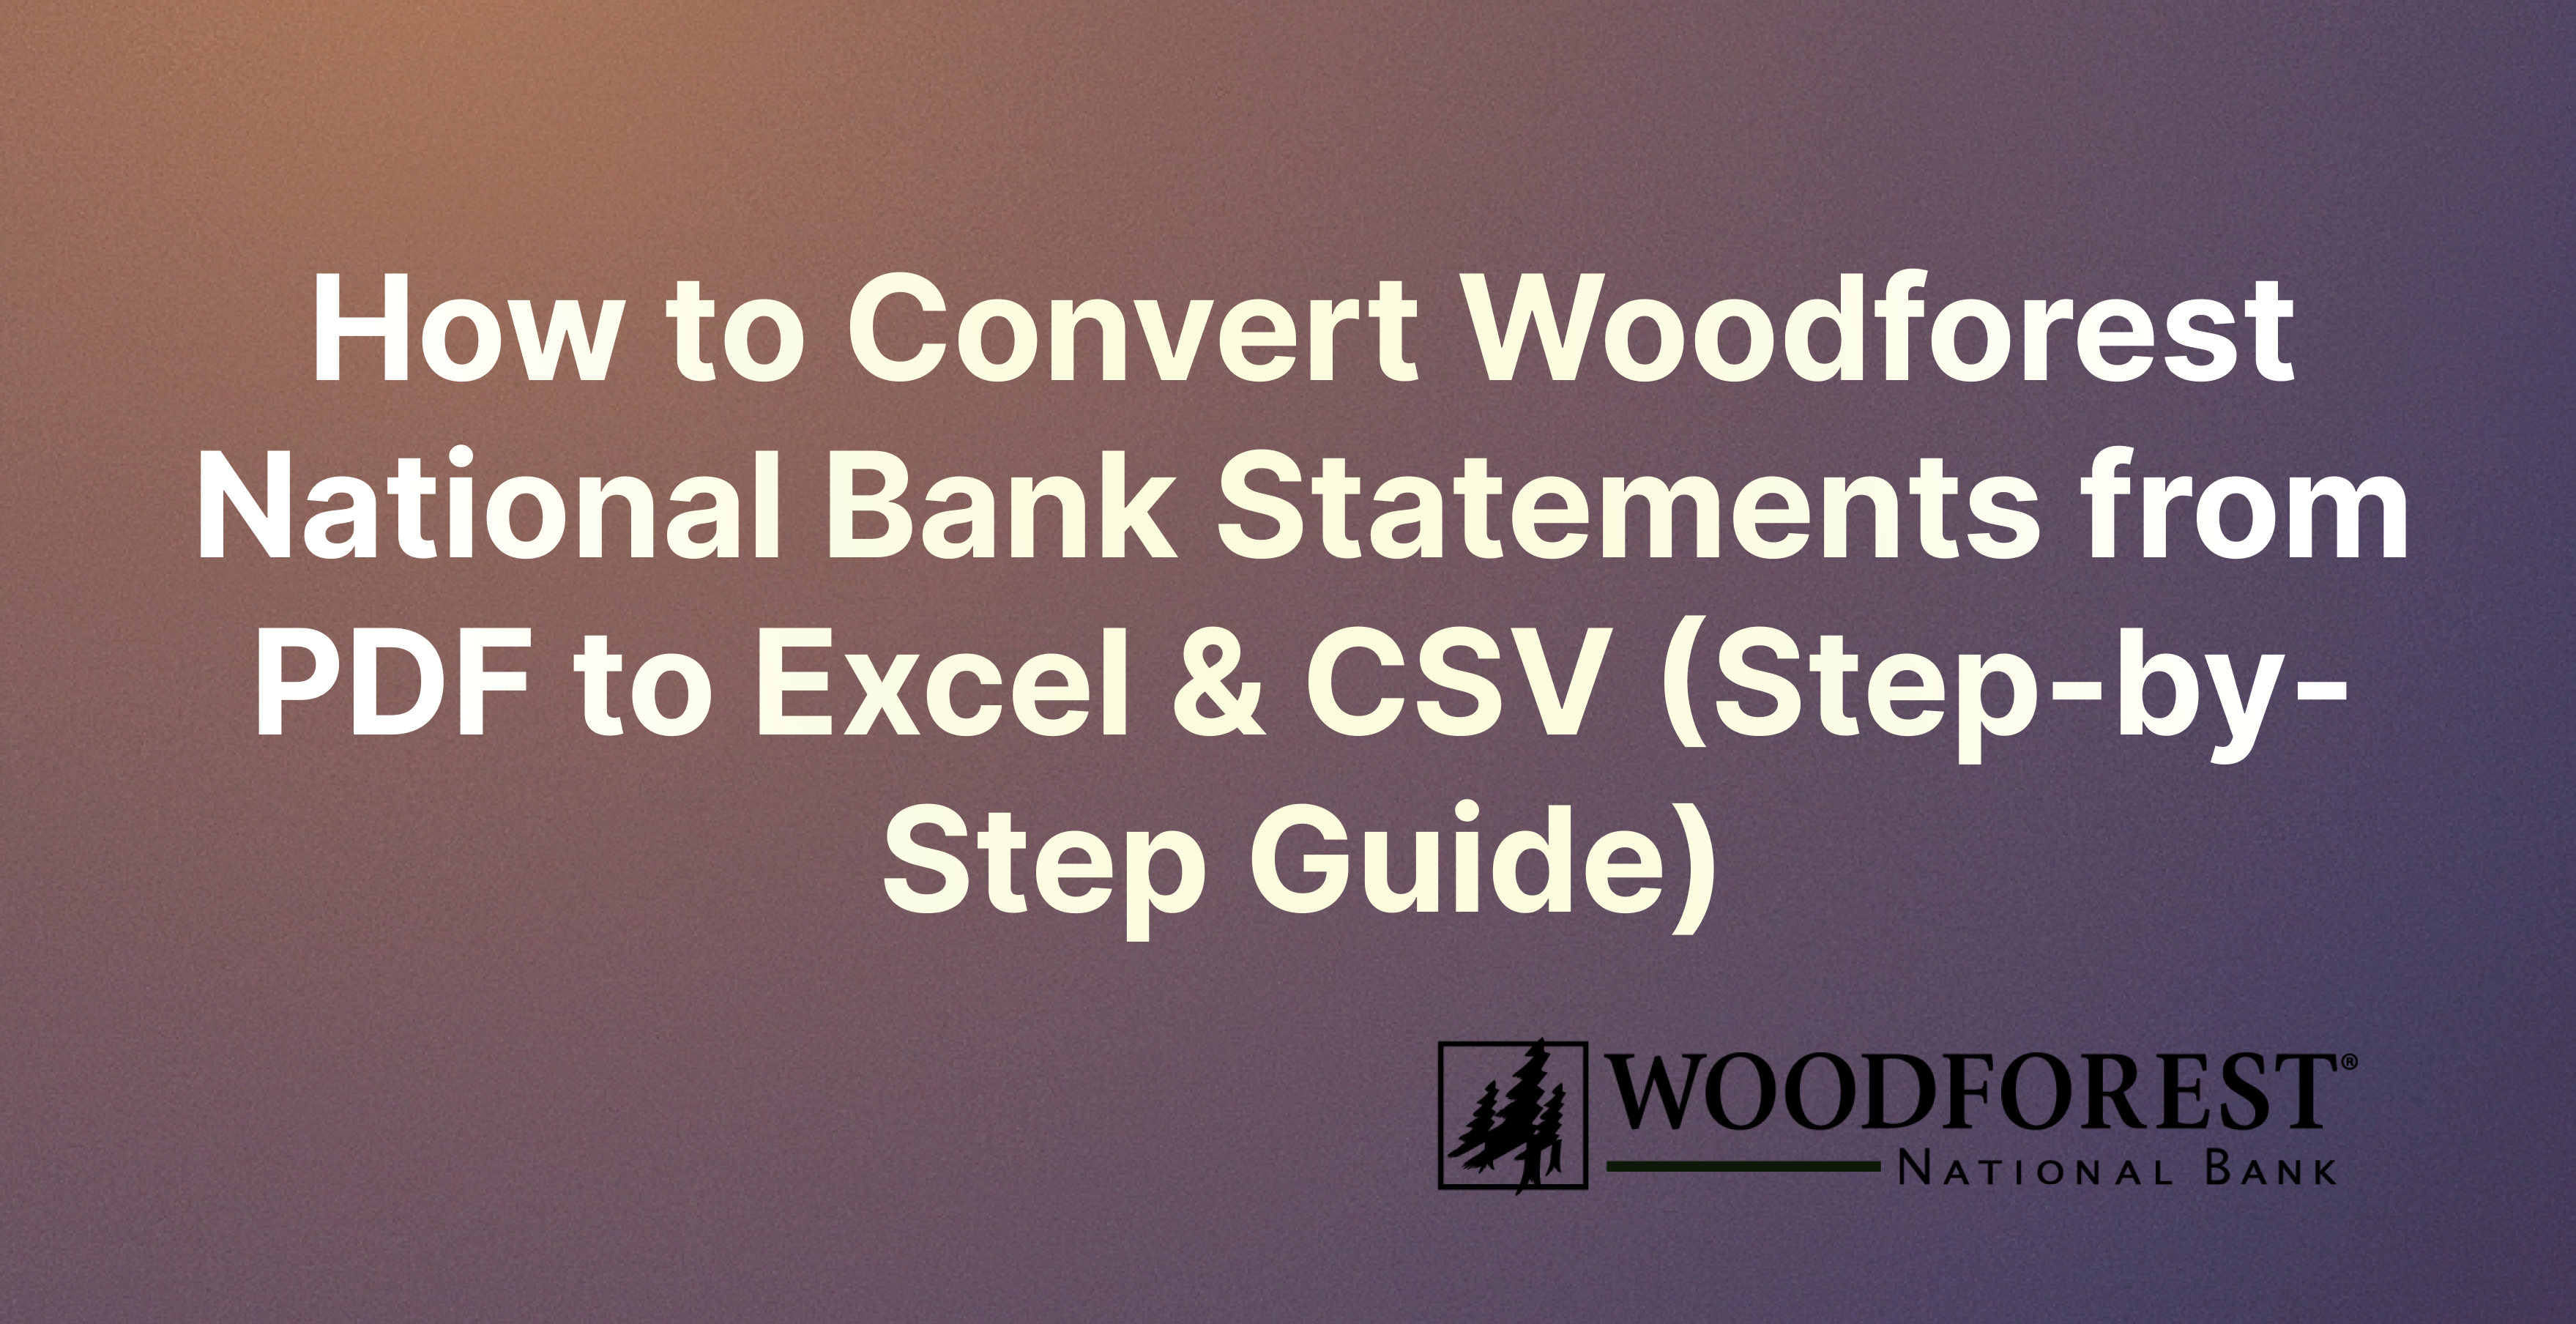 How to Convert Woodforest National Bank Statements from PDF to Excel & CSV (Step-by-Step Guide)